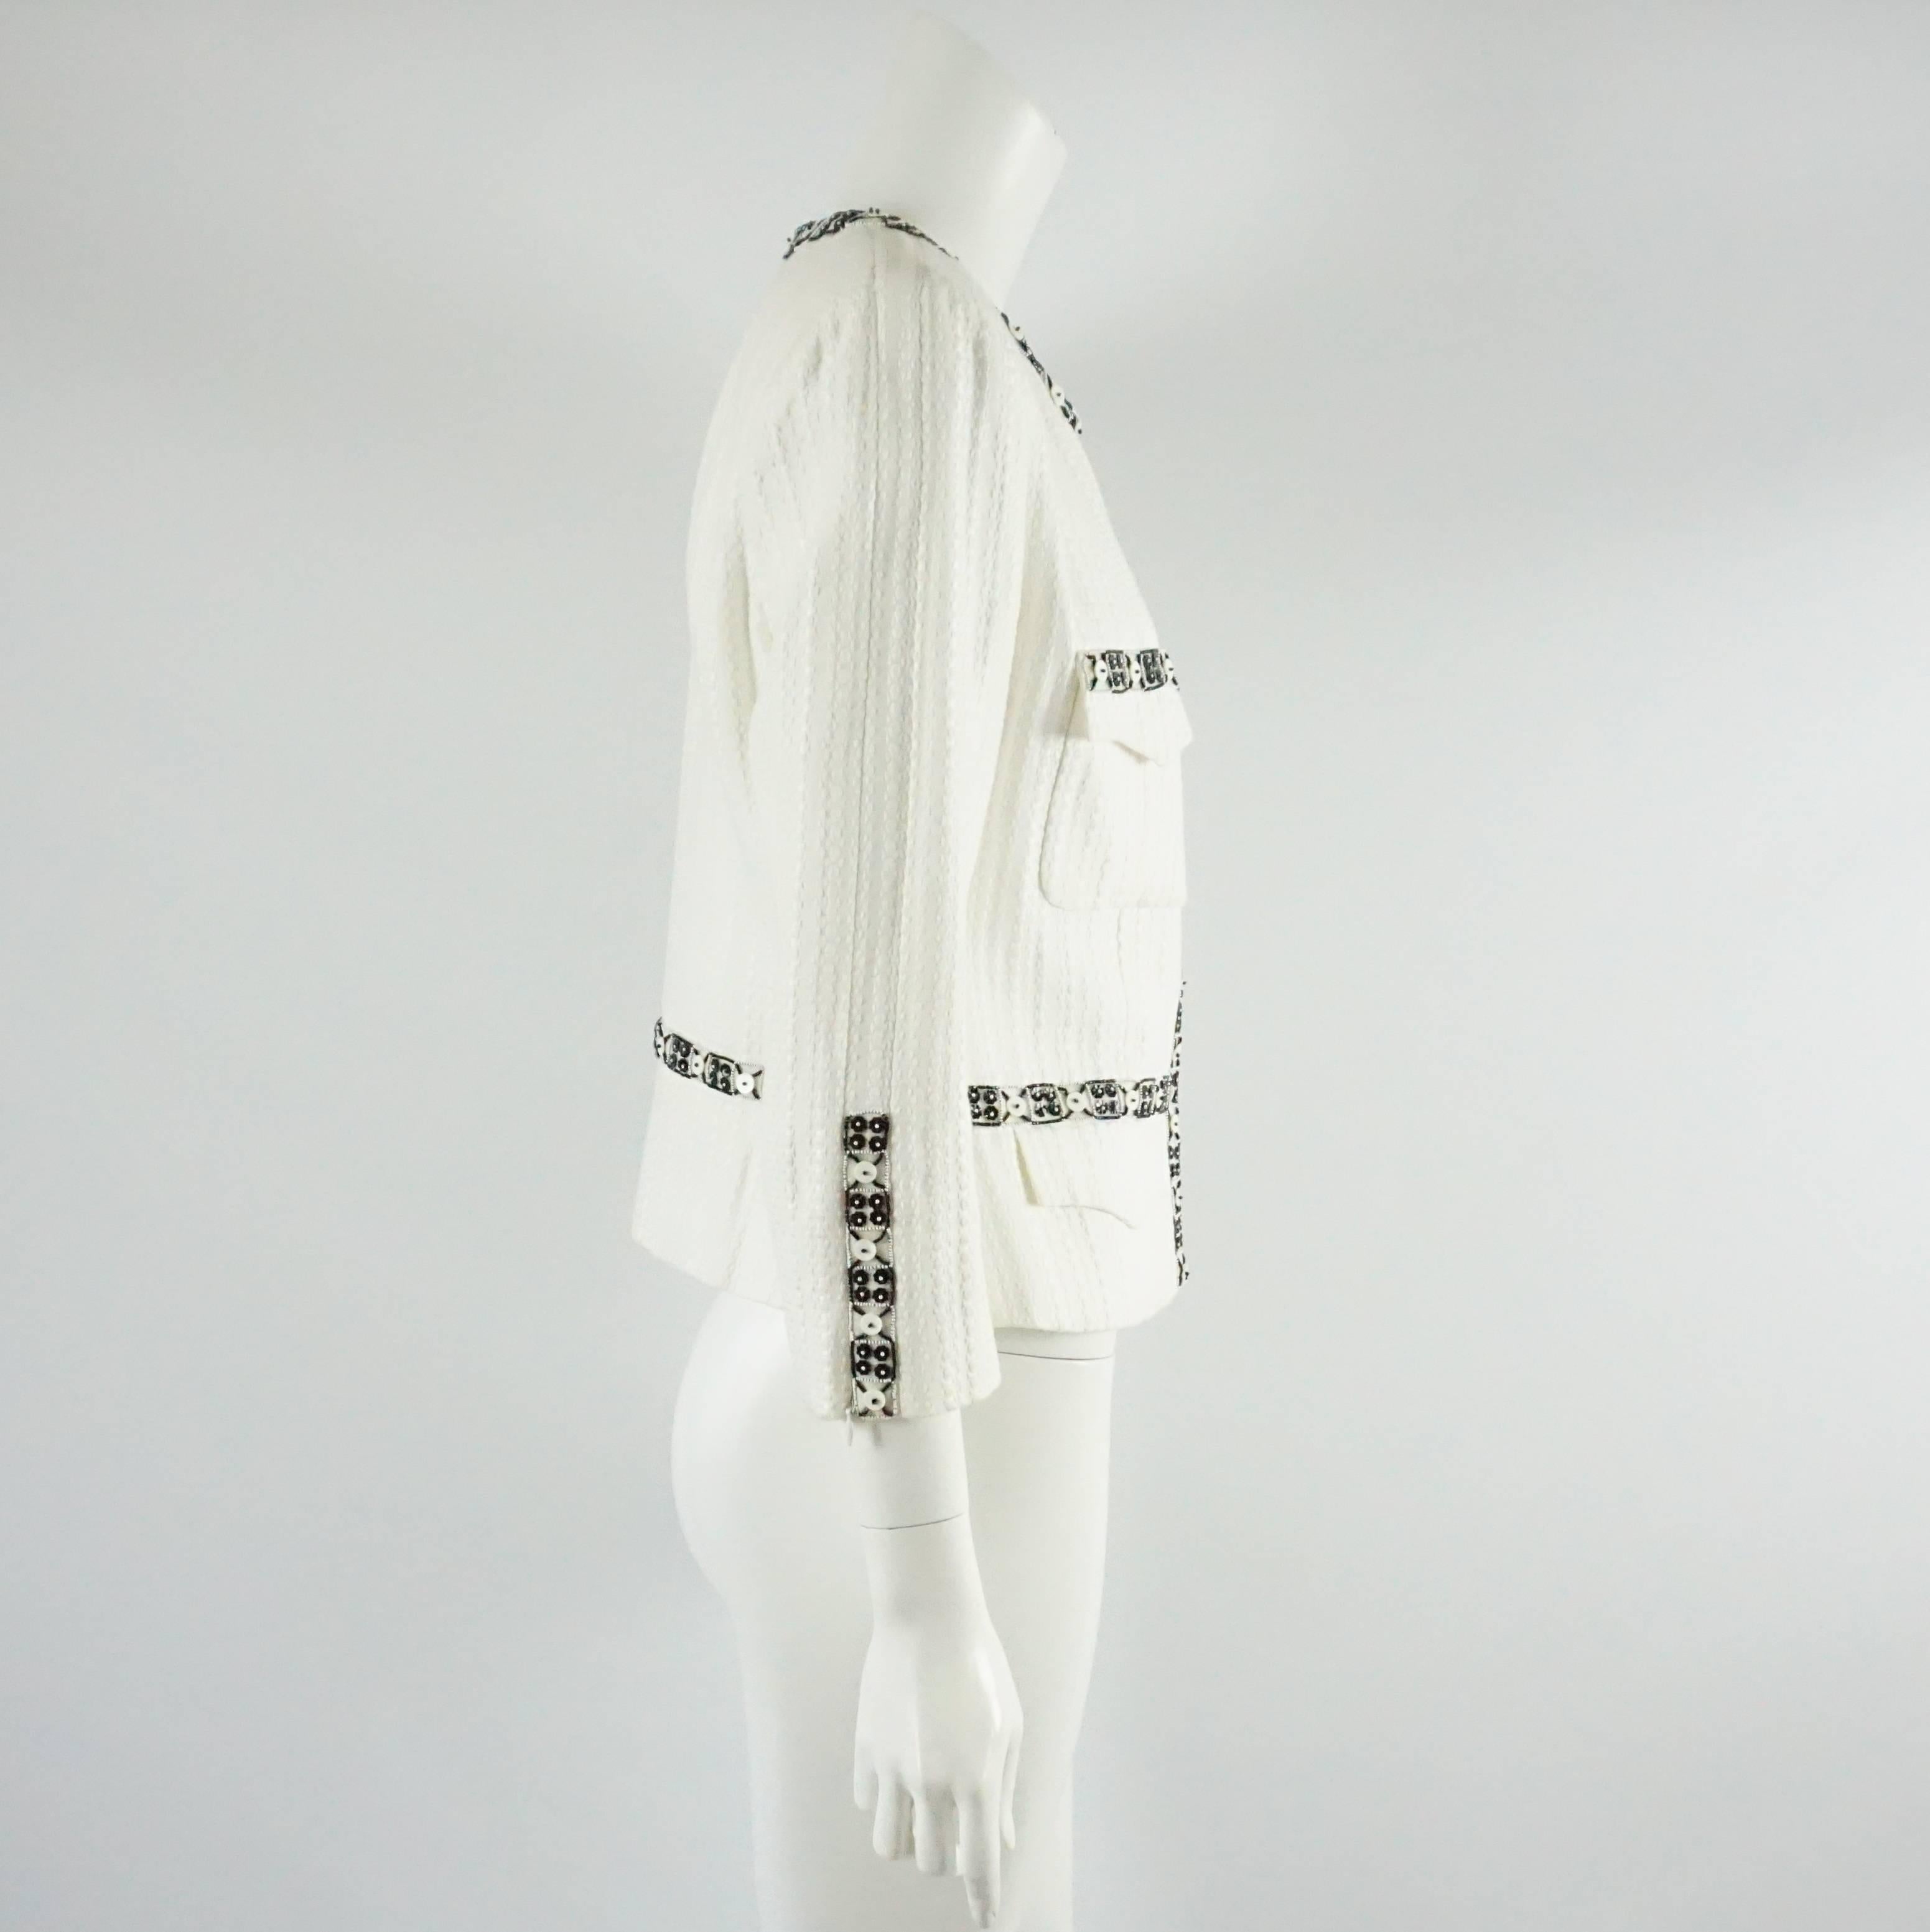 This Chanel white cotton jacket has a black beaded trim and detailing. There are 4 pockets on the front and a zipper on each sleeve cuff. This jacket is in excellent condition. Size 46.

Measurements
Shoulder to Shoulder: 15.5"
Sleeve Length: